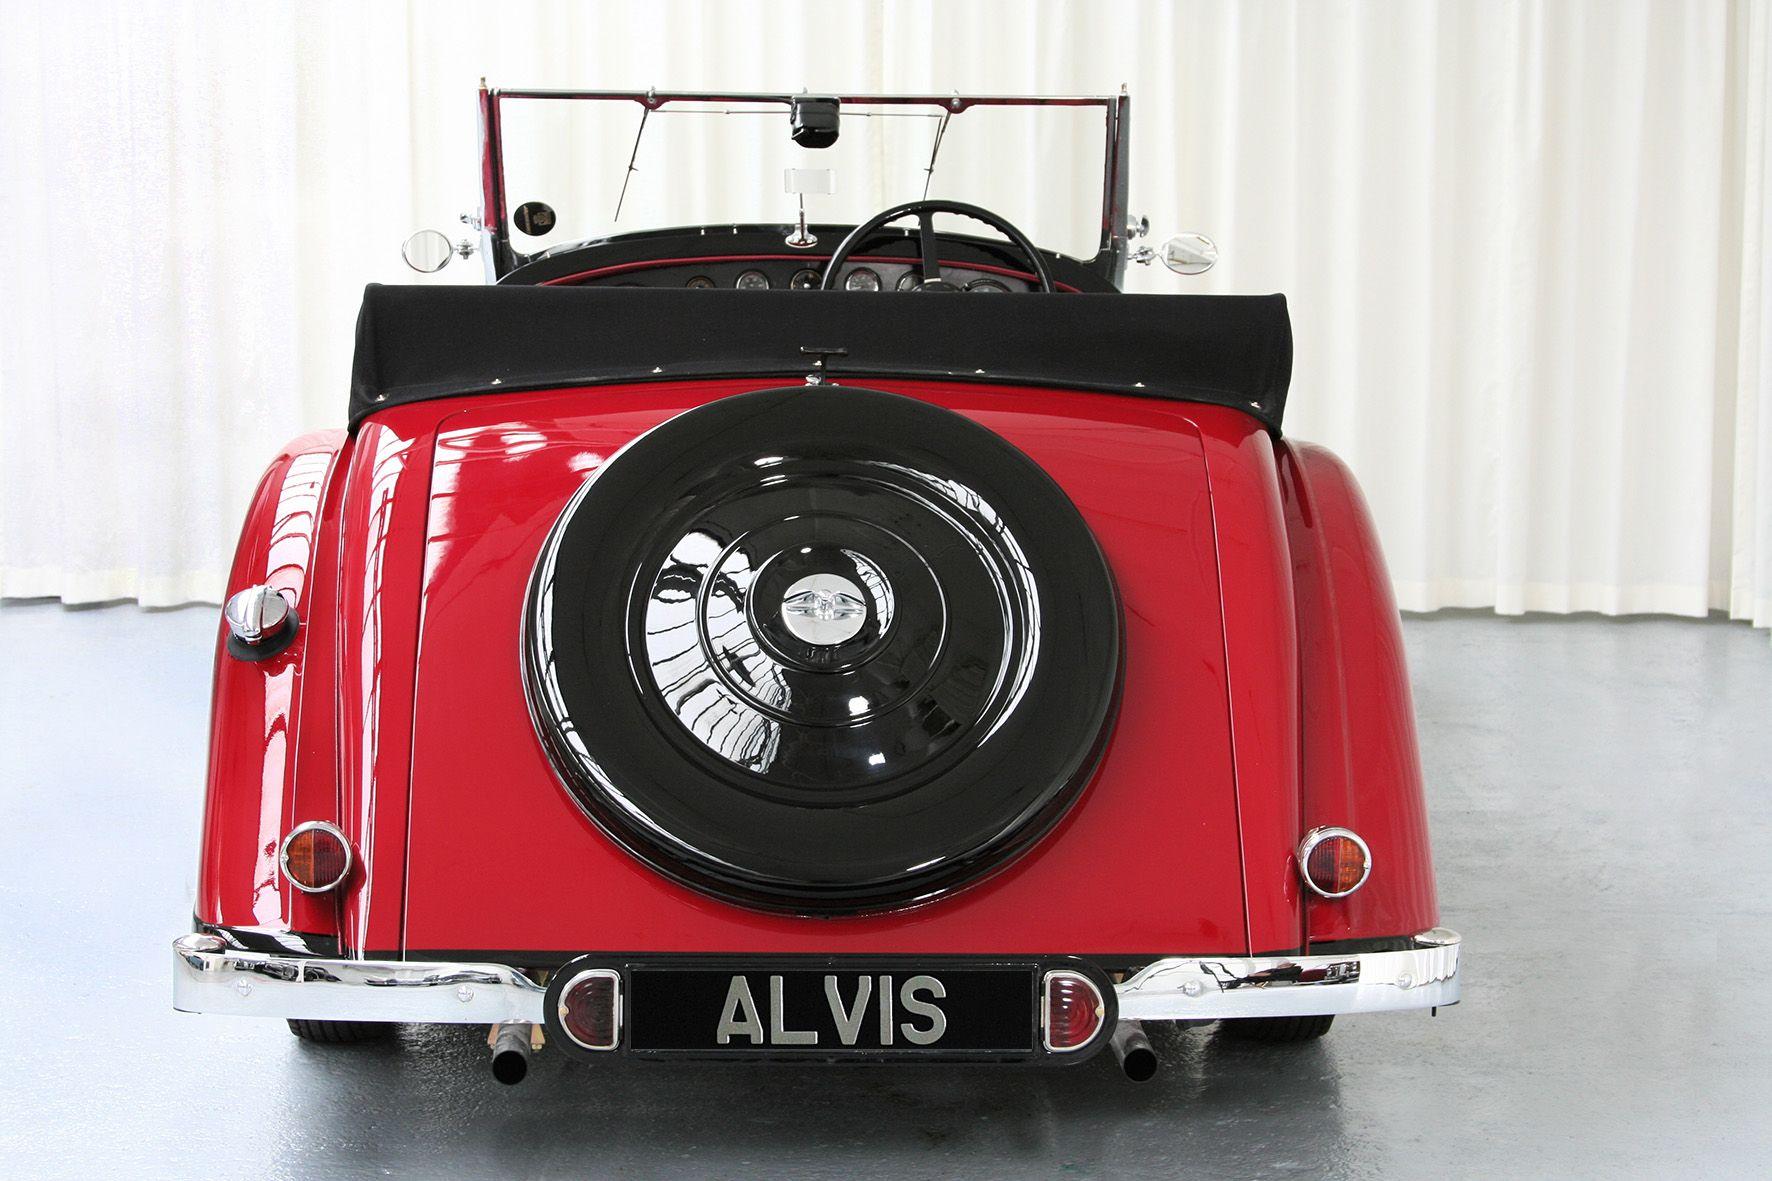 Red Triangle Automotive Logo - 39schass3 - Red Triangle - Alvis Parts, Restoration and Car Sales